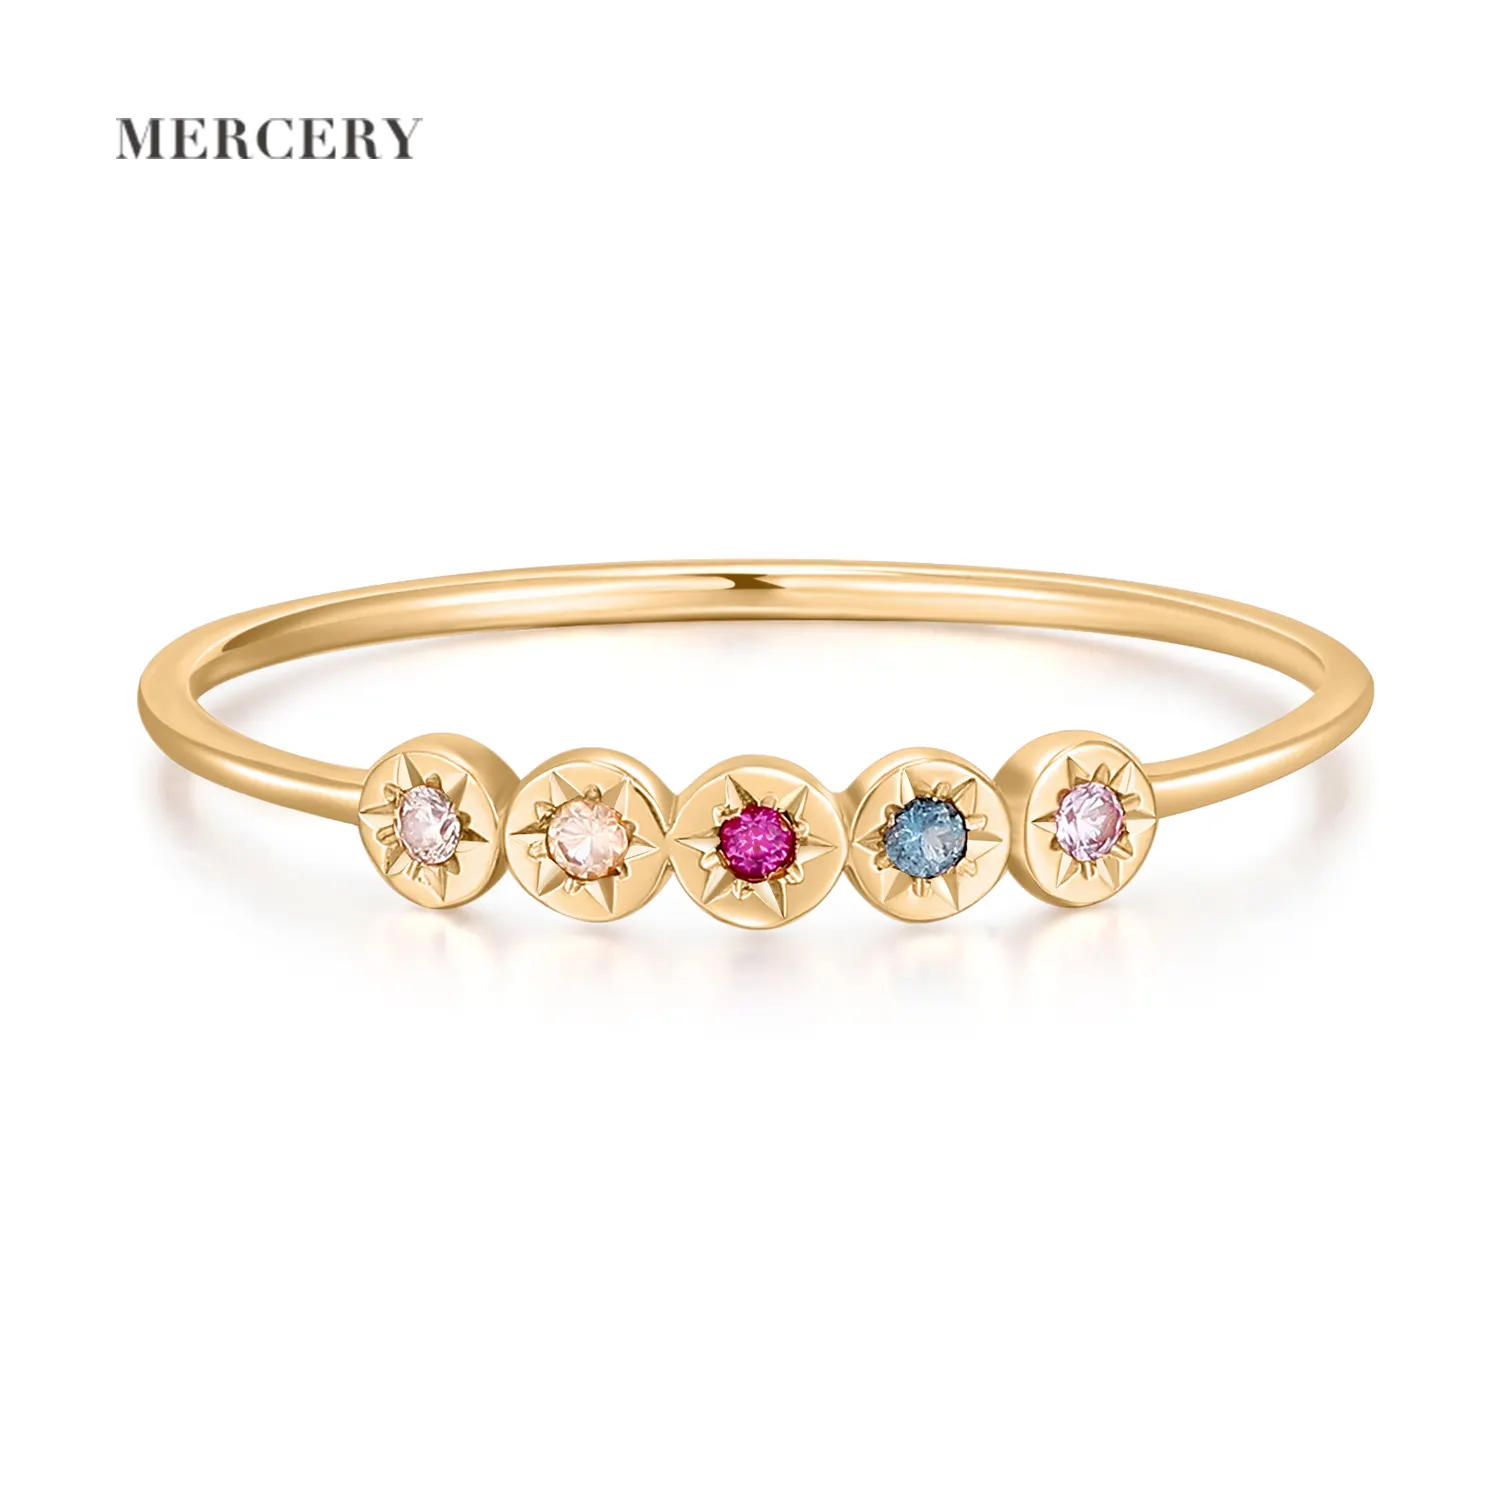 Mercery Colorful Gemstone Jewelry Engagement Ring Diamond 14K Solid Gold Gemstone Rings For Women